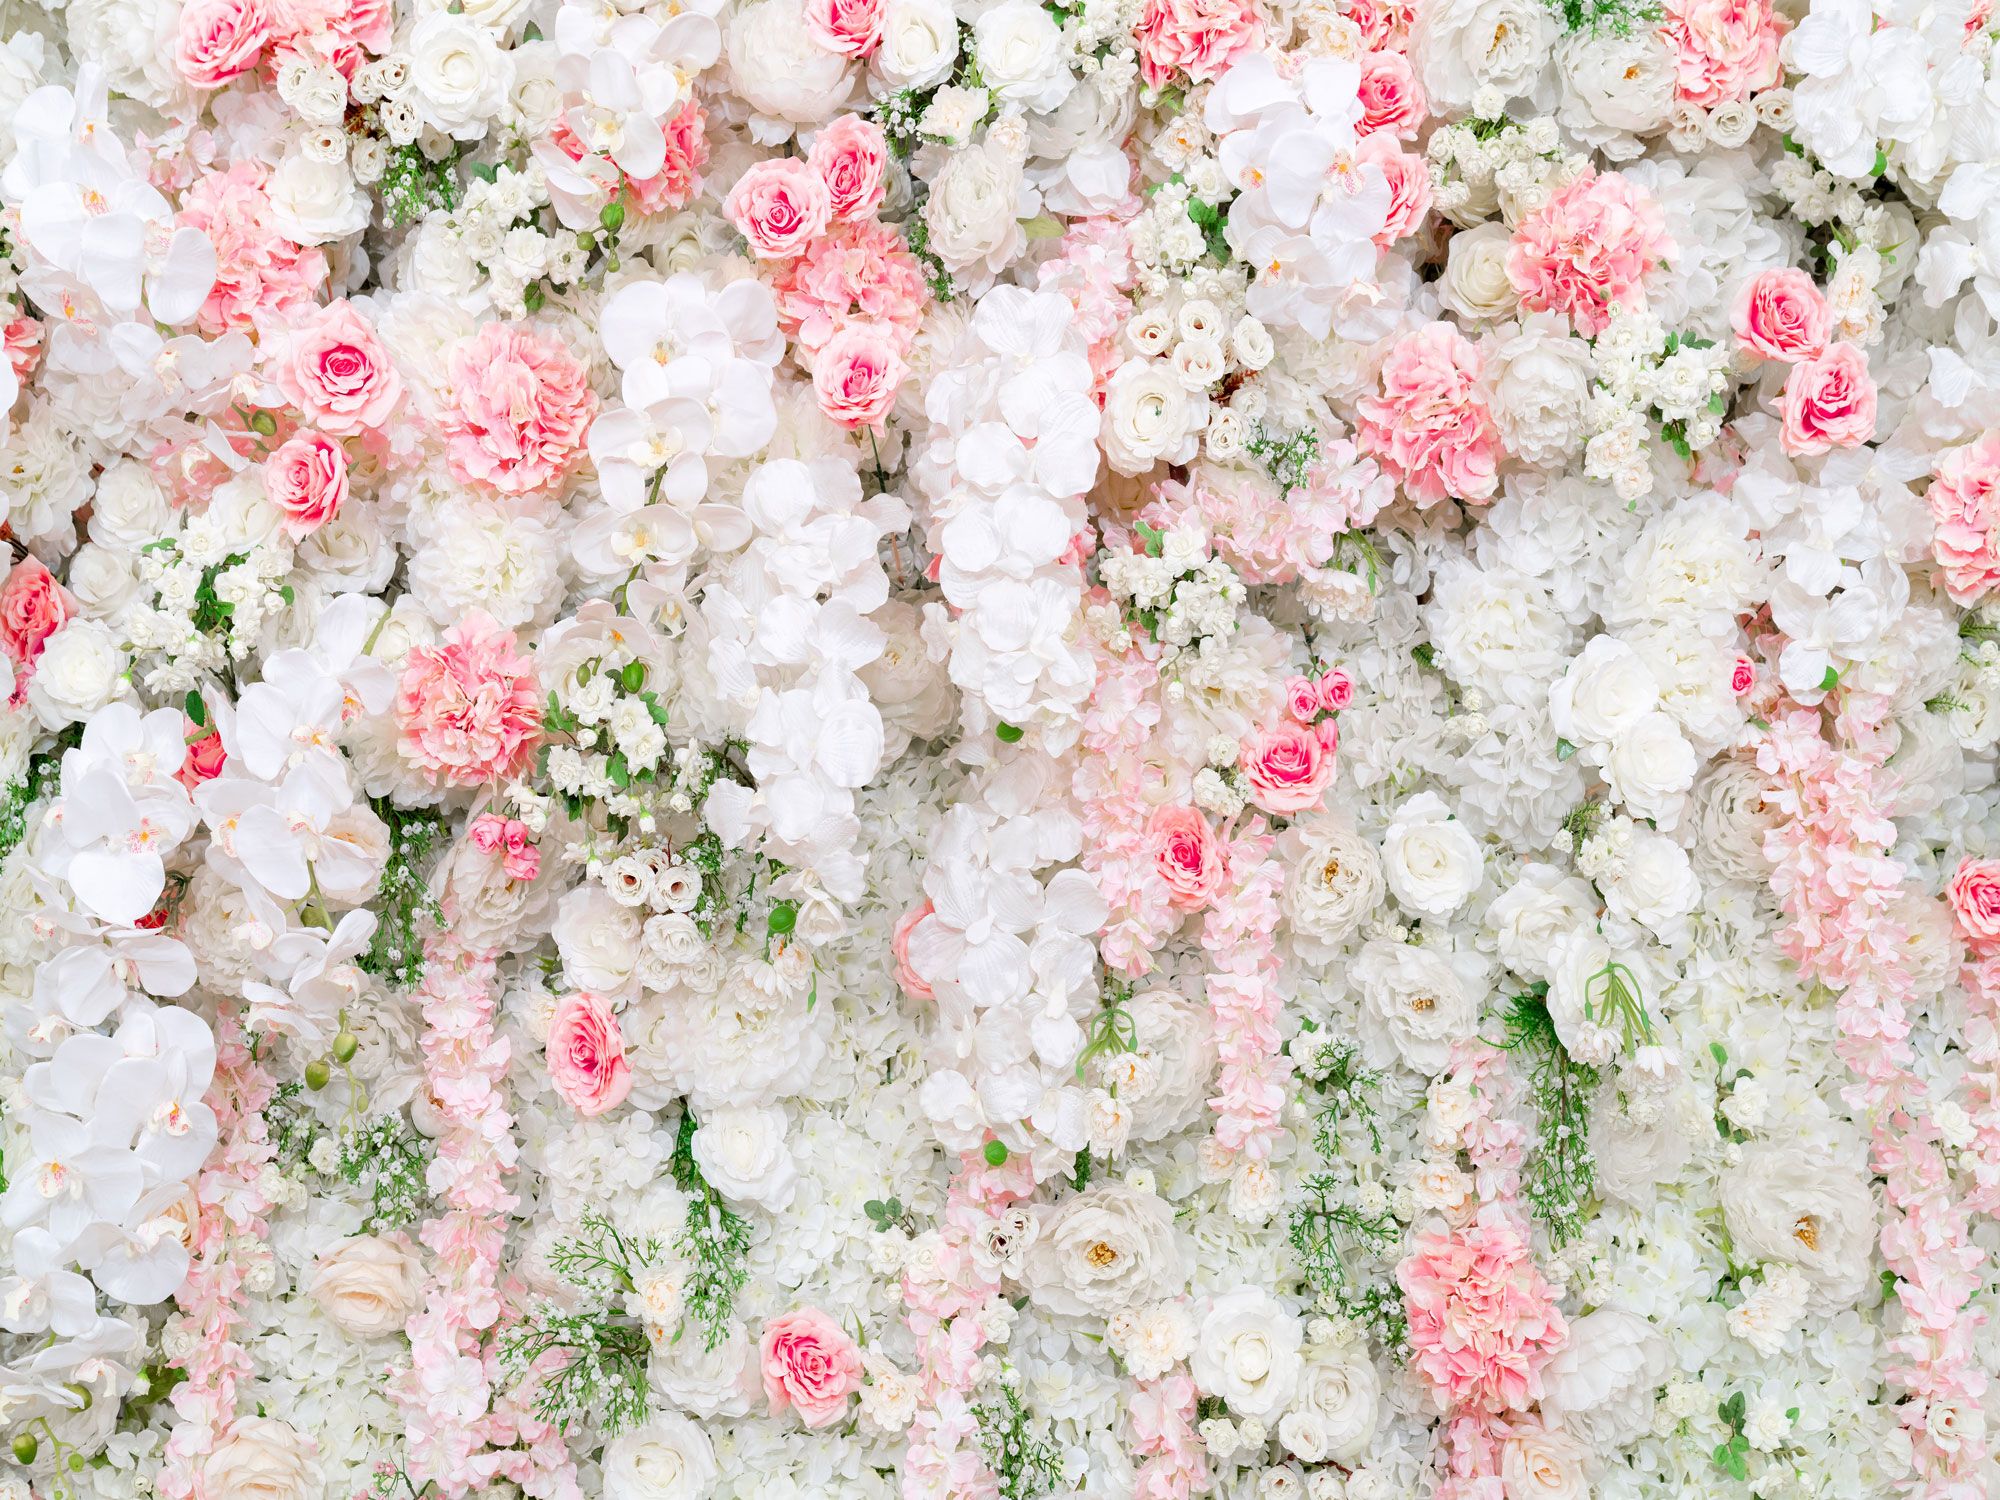 Shop Background Material Online, Beautiful Flowers Wedding Scene Vinyl Photography Backdrops